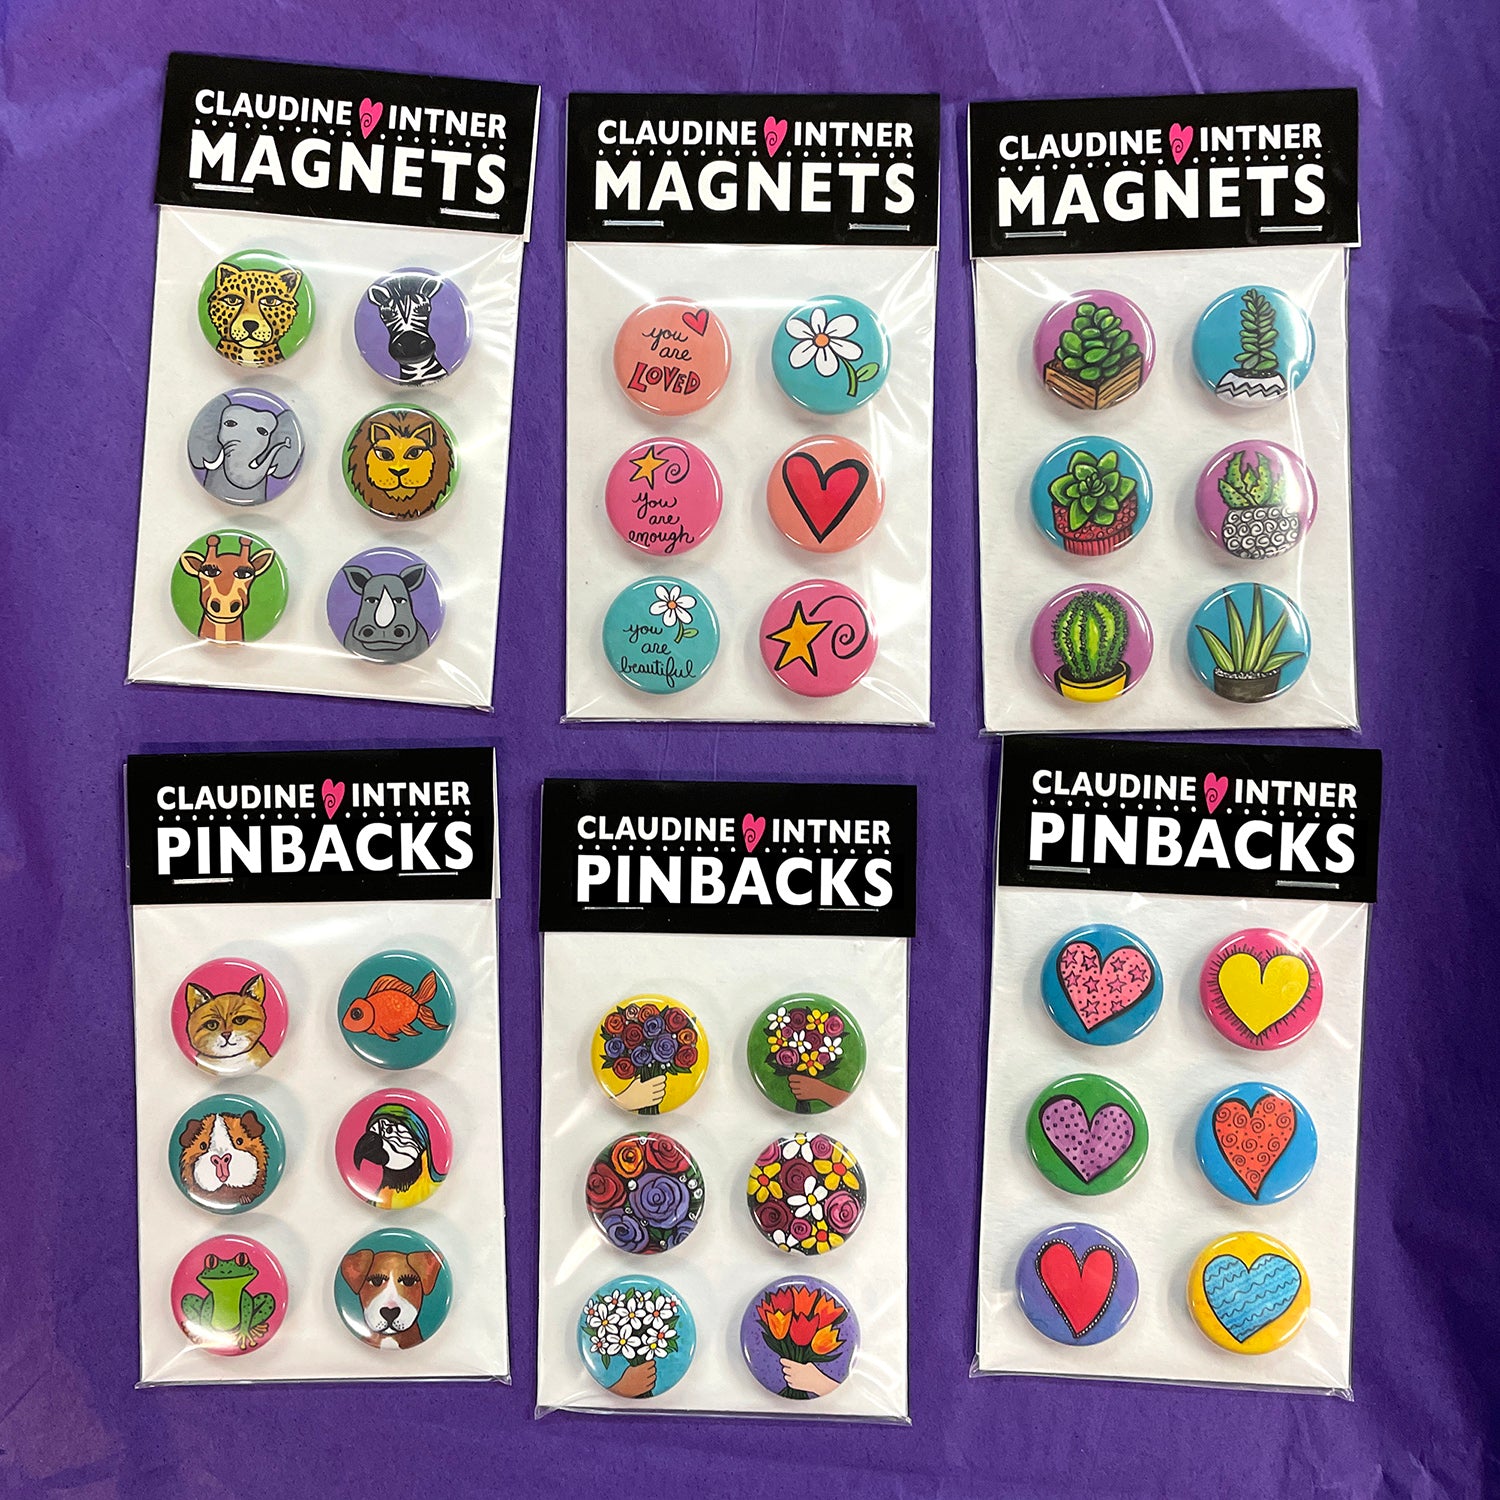 Recycling Magnets or Pins